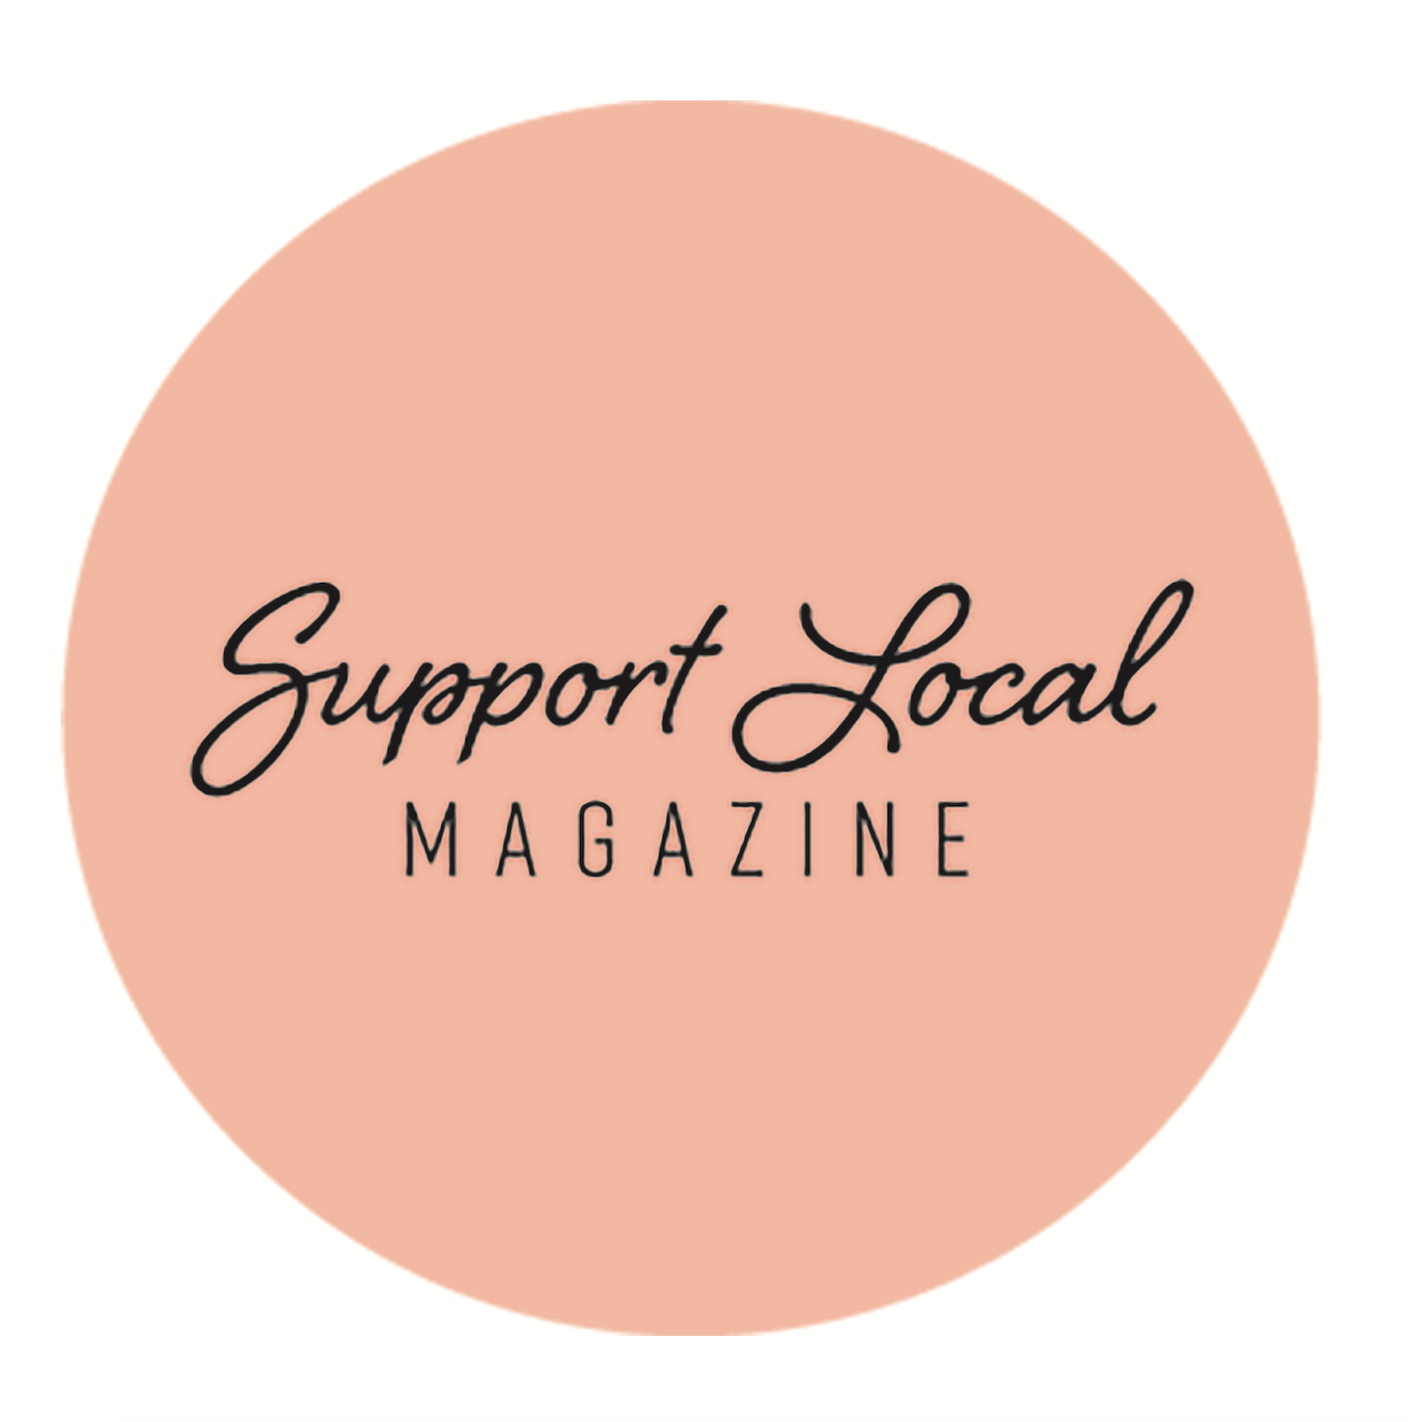 Support local magazine.png